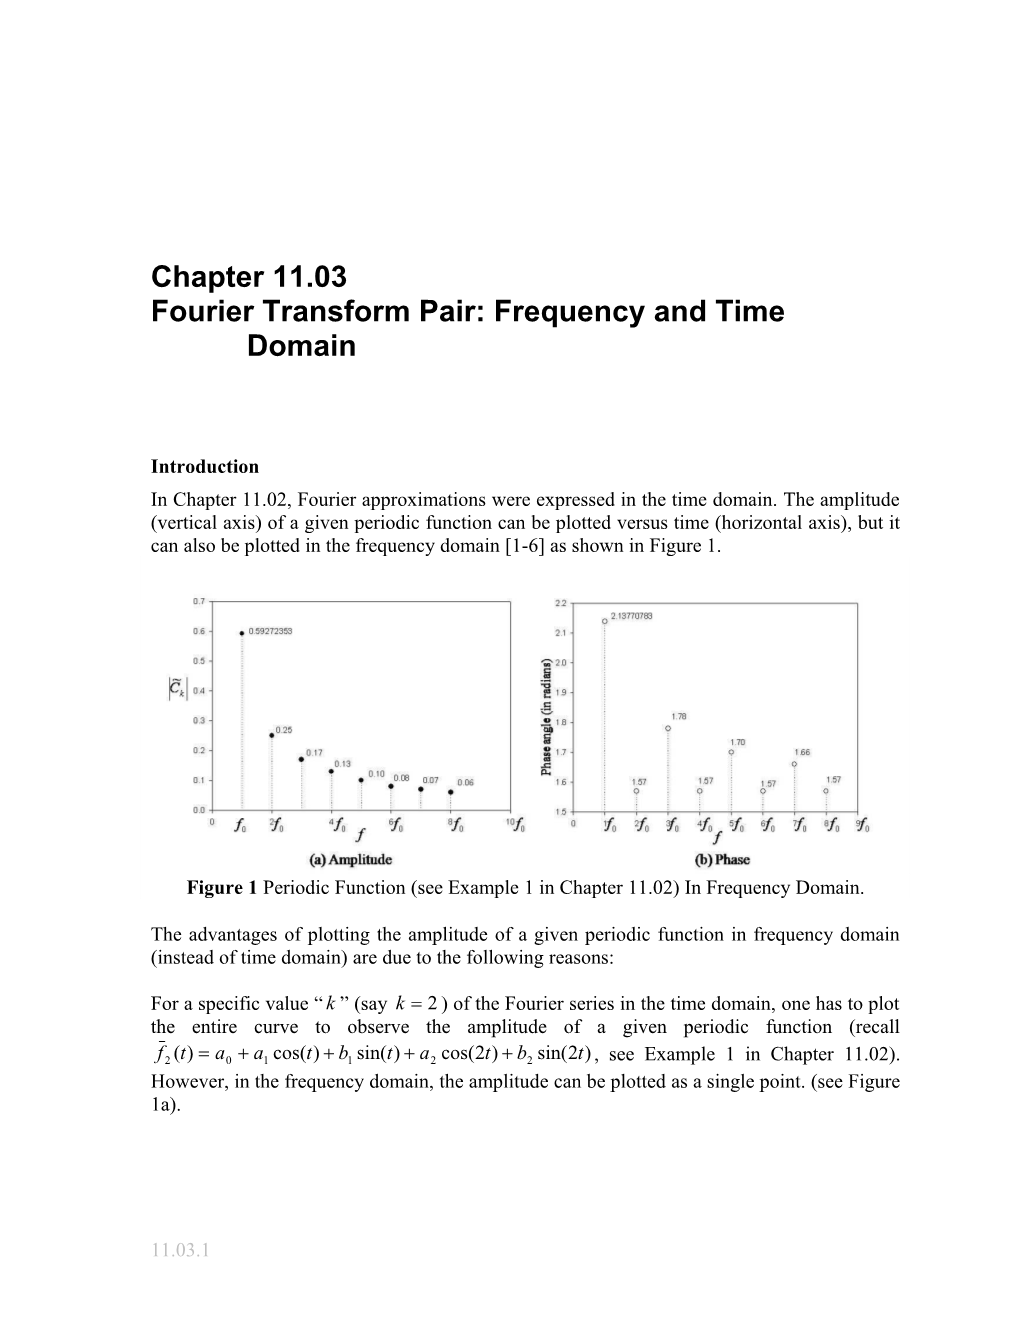 Textbook Notes on Fourier Transform Pair: Frequency and Time Domain